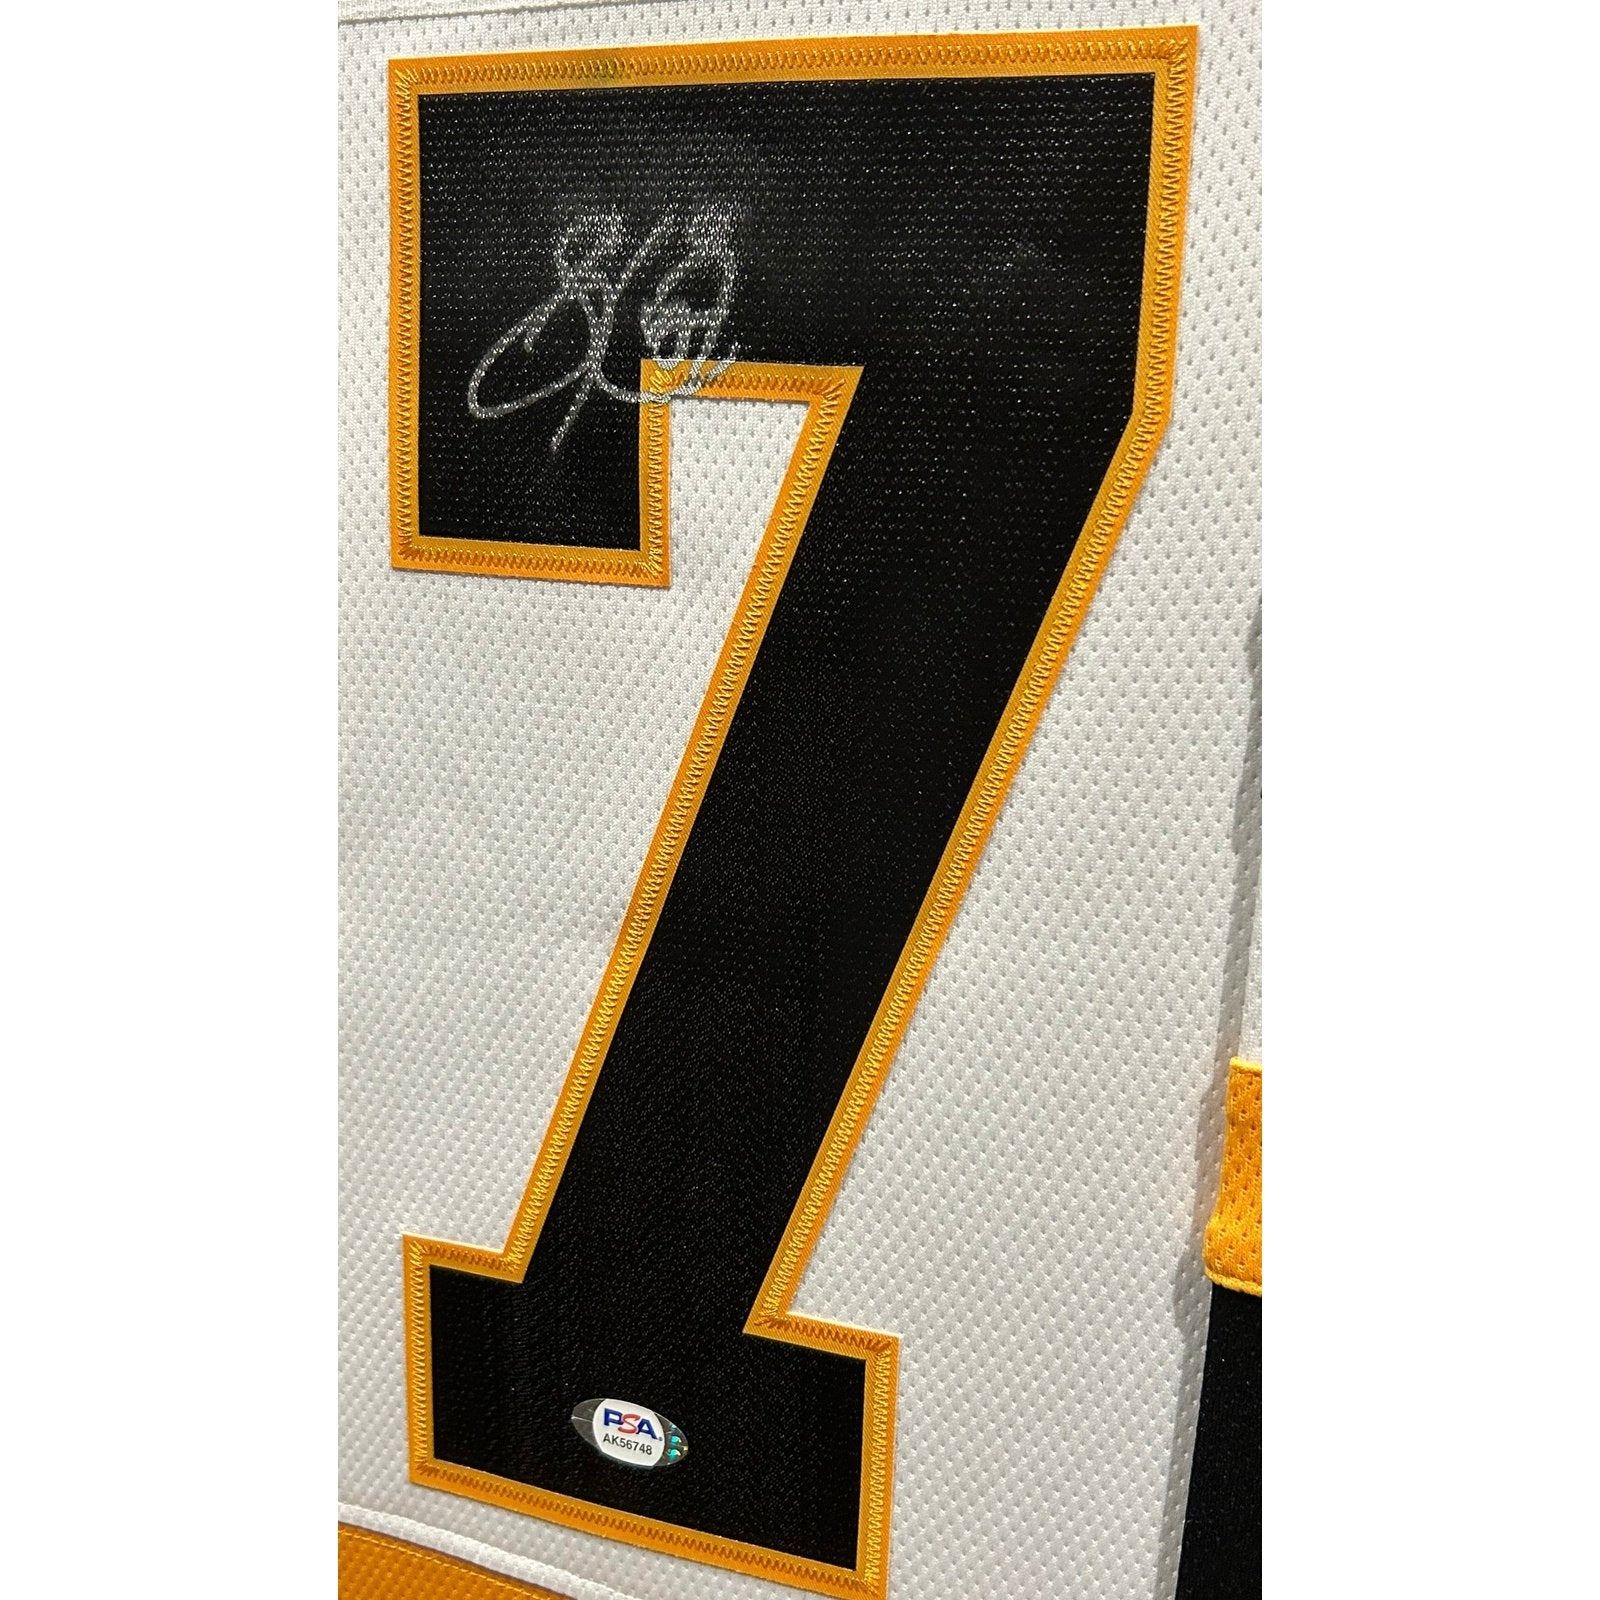 SIDNEY CROSBY SIGNED AUTOGRAPH AUTHENTIC WINTER CLASSIC JERSEY - PENGUINS  PSA